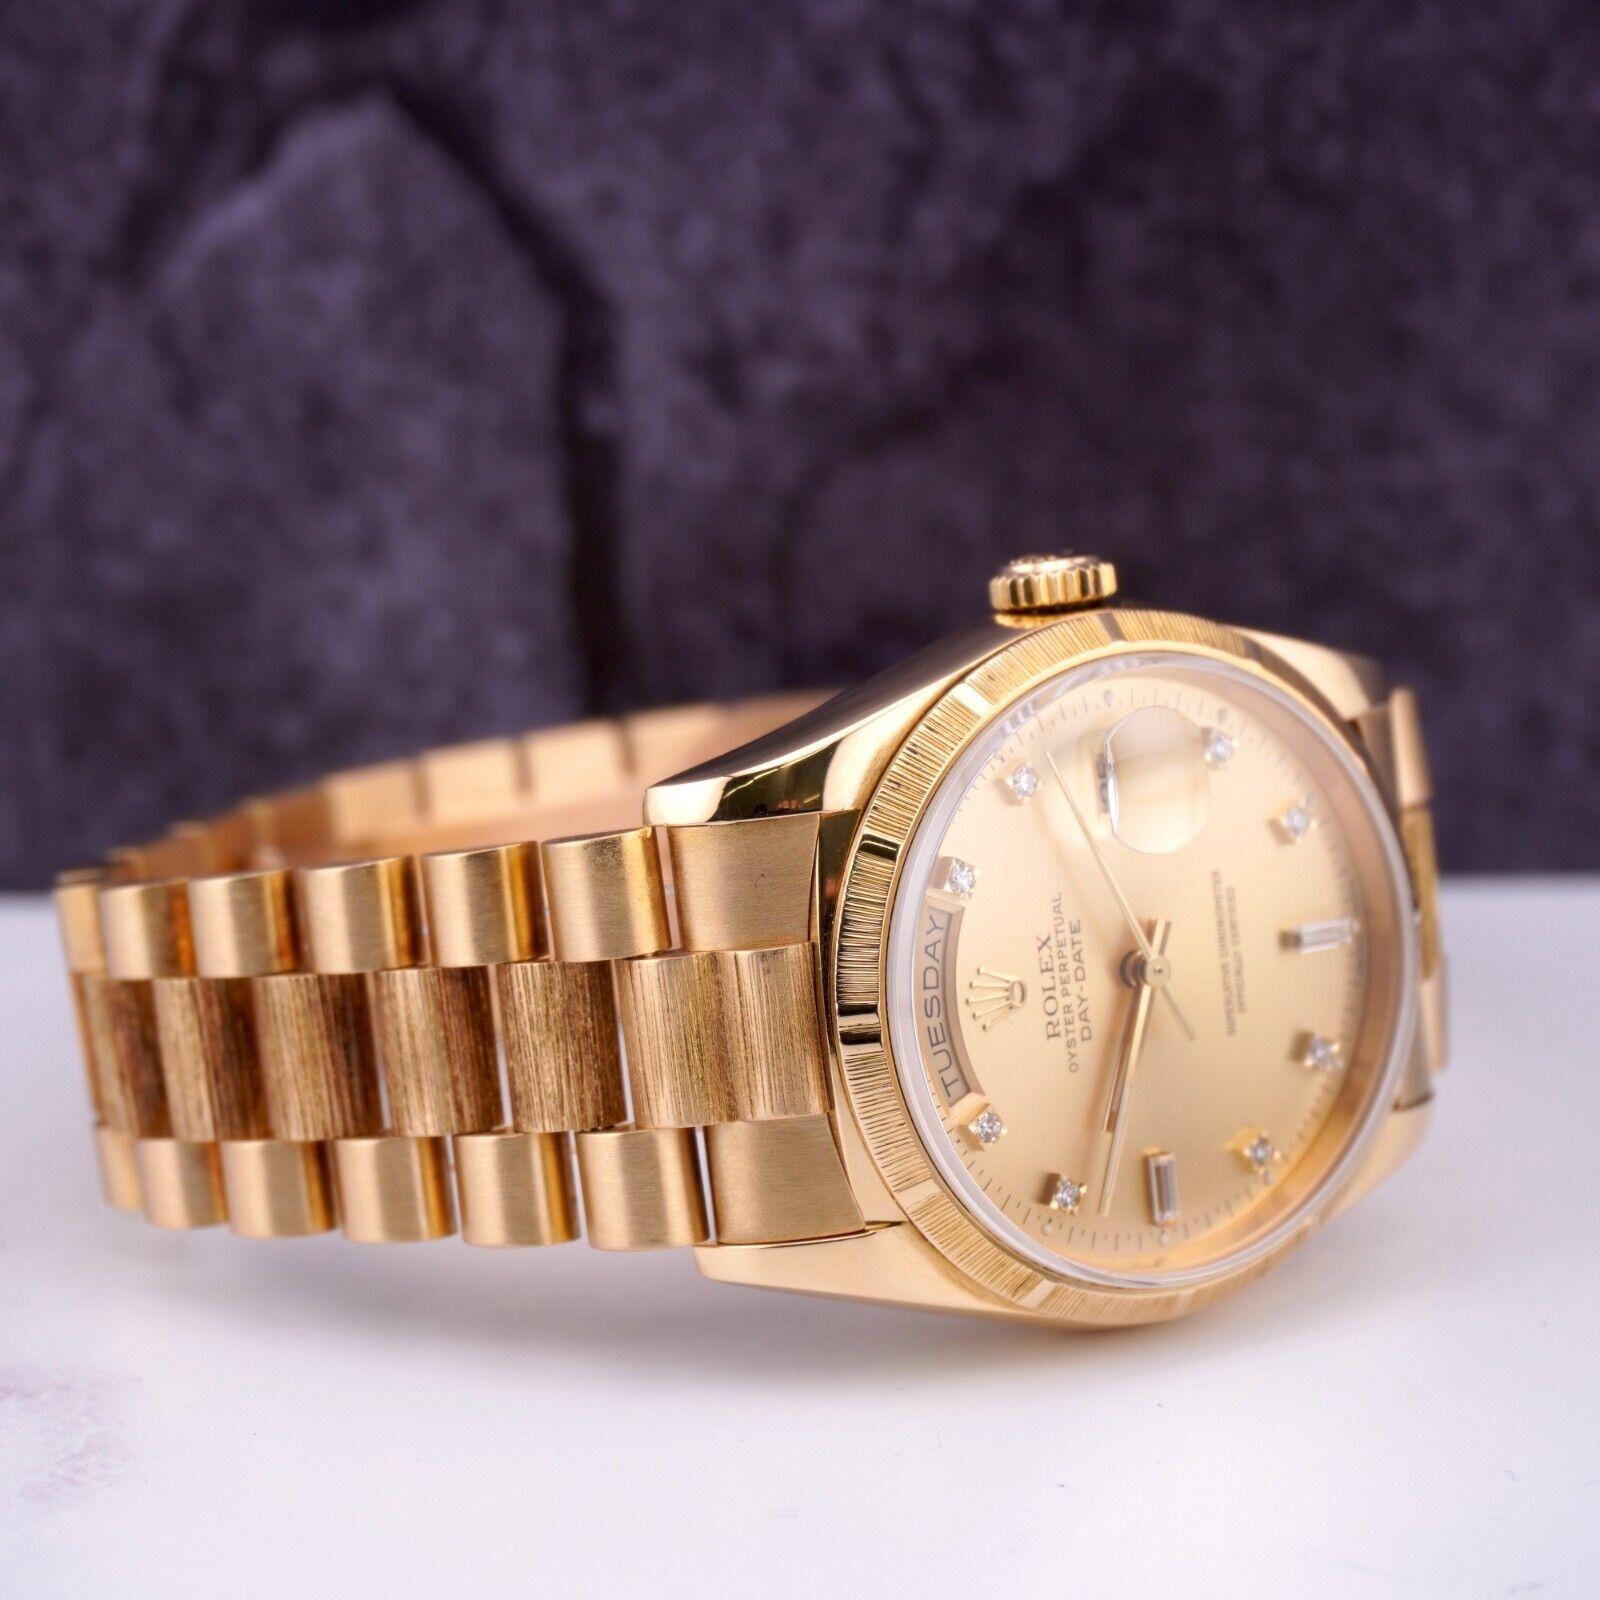 Rolex DAY-DATE 36mm President Men's 18K Yellow Gold Diamond Dial Watch Ref 18248 For Sale 3